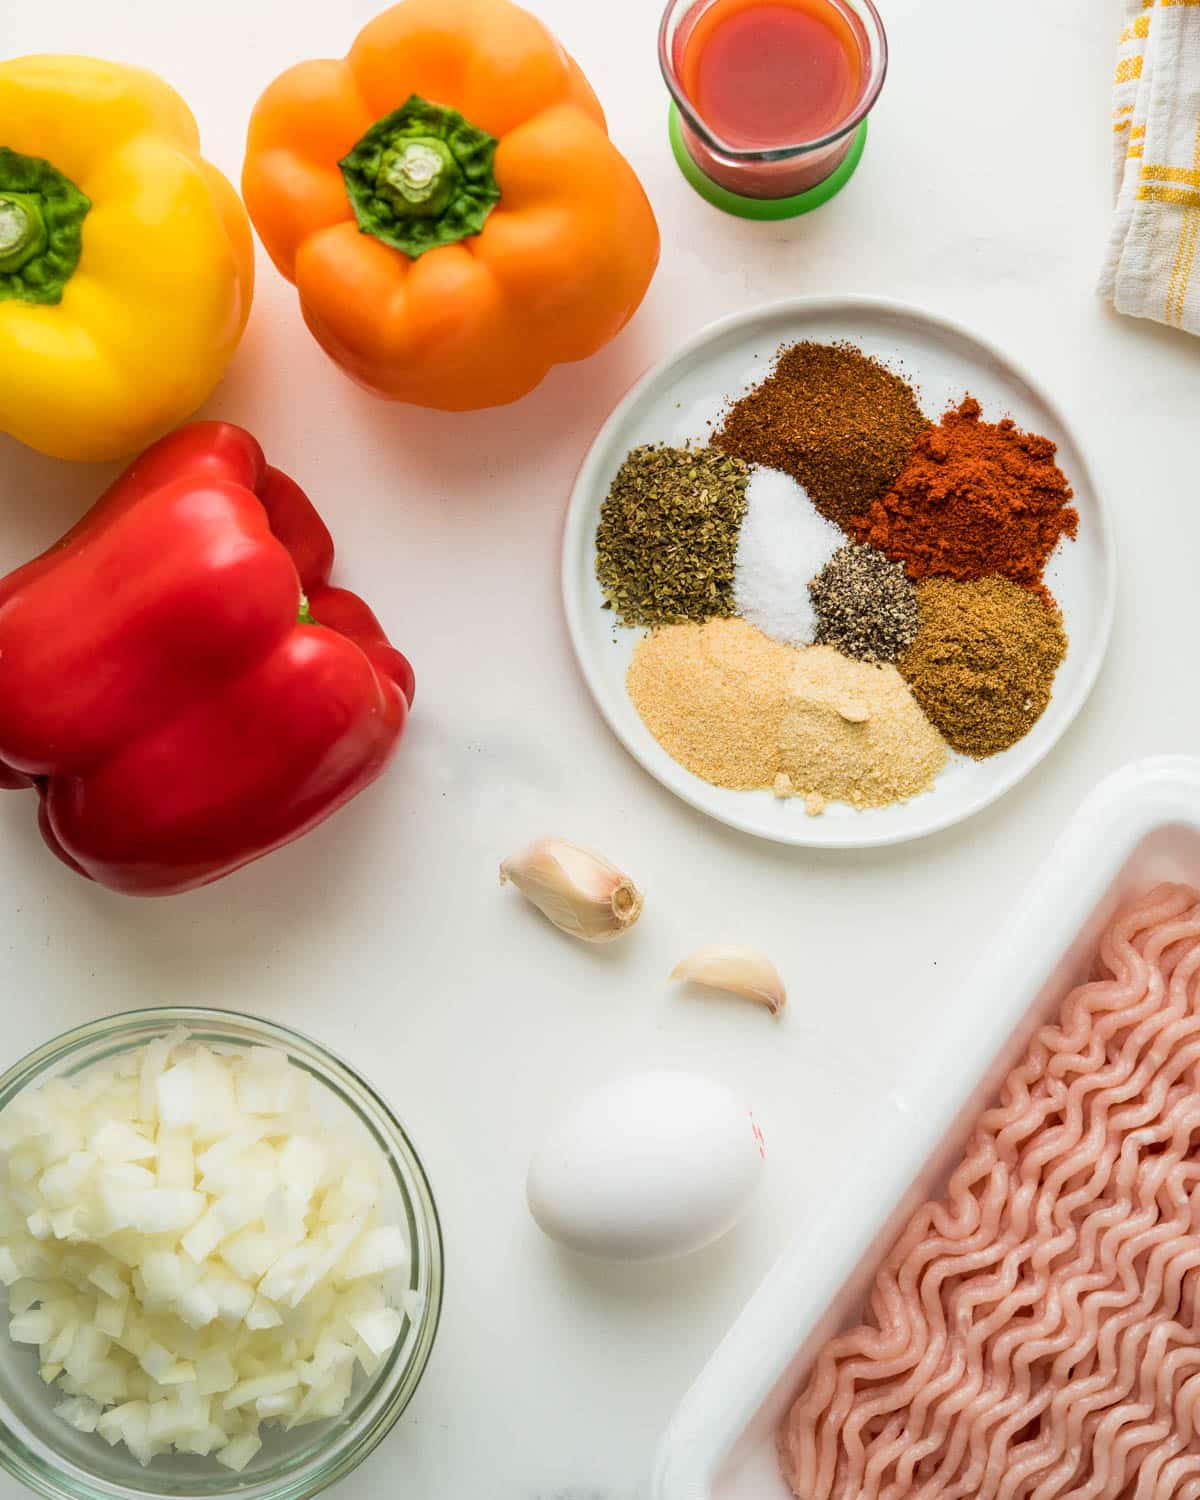 Ingredients for the taco stuffed peppers recipe.